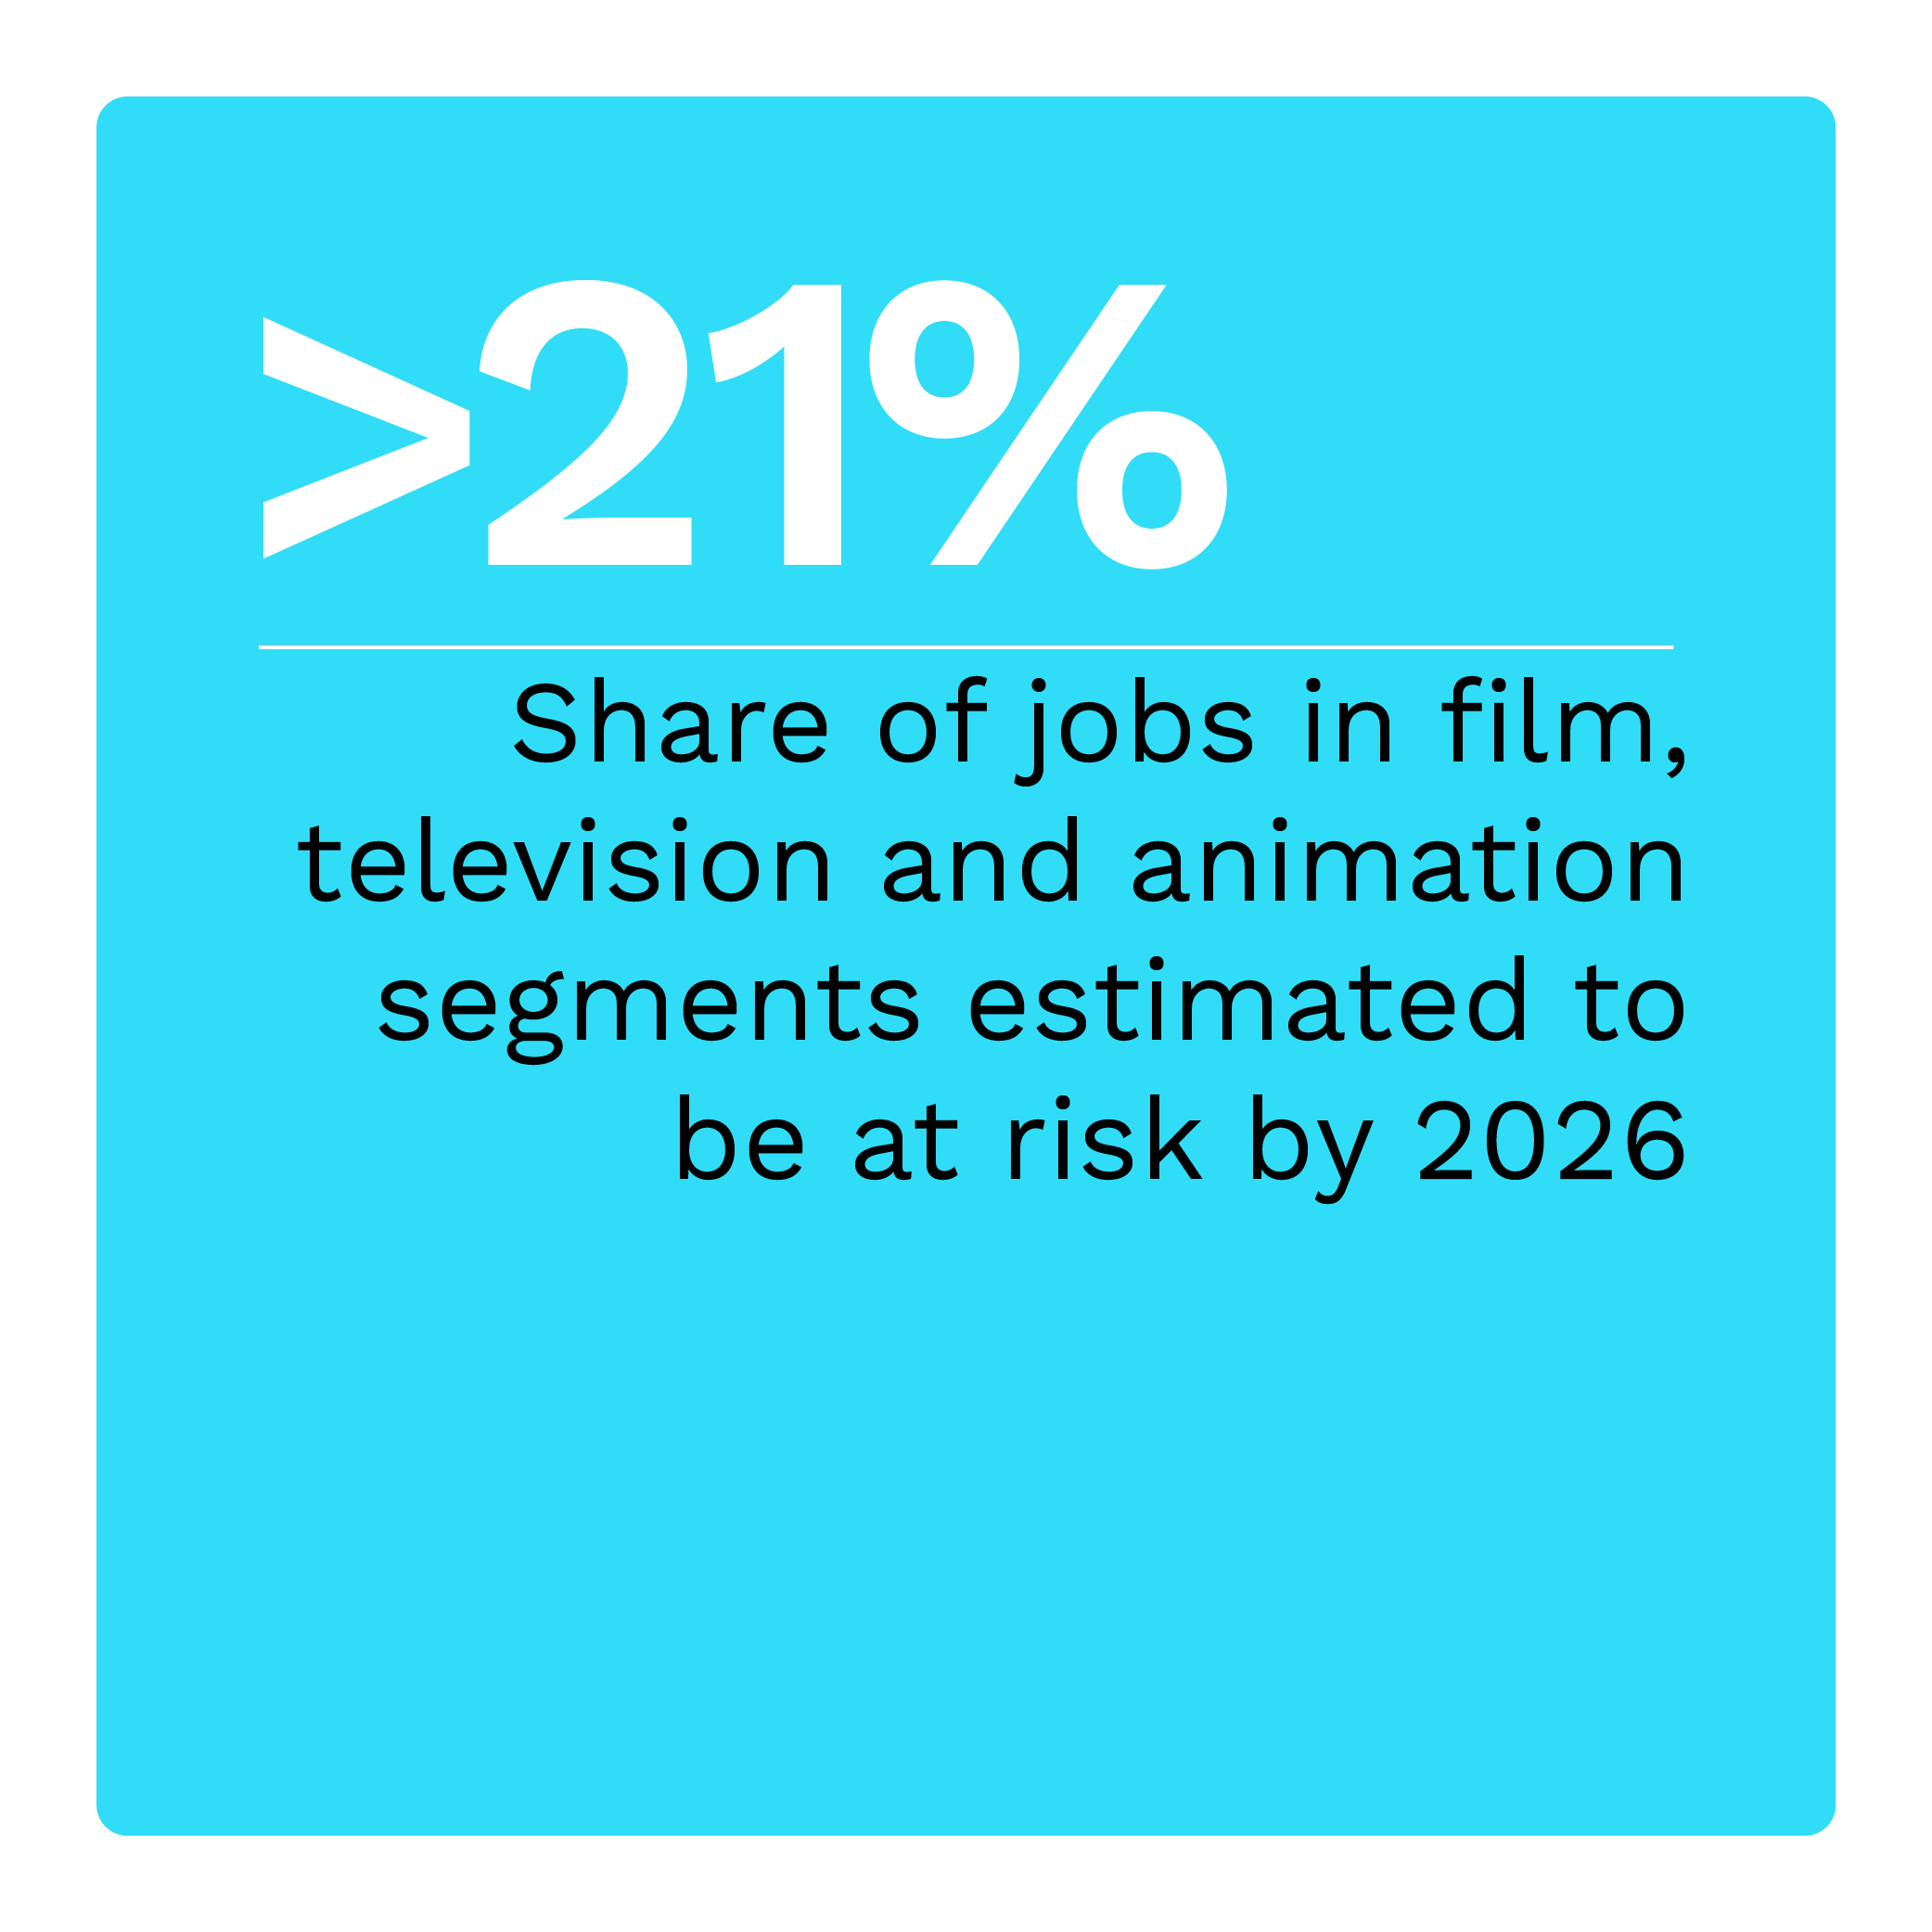  Share of jobs in film, television and animation segments estimated to be at risk by 2026